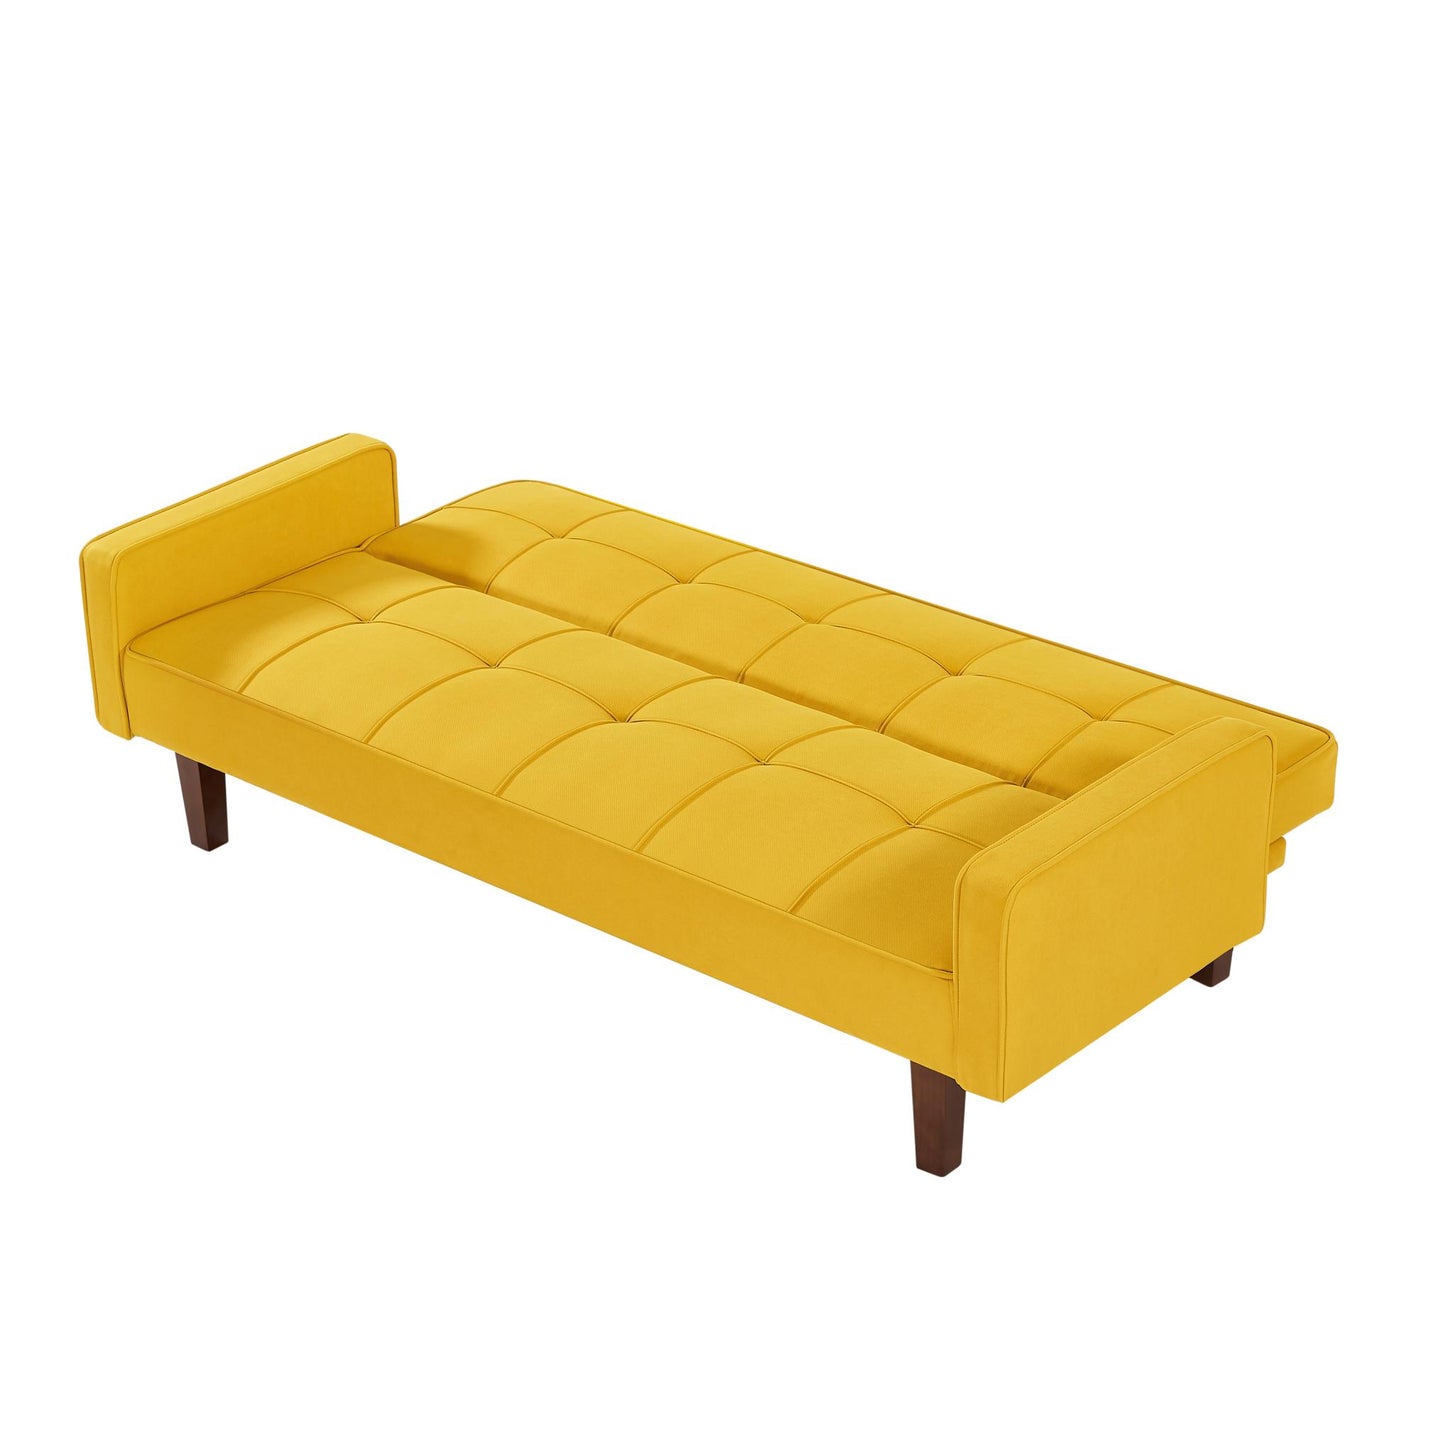 Modern Solid Color Sofa Bed for Living Room, Multi-Function Sleeper Couch